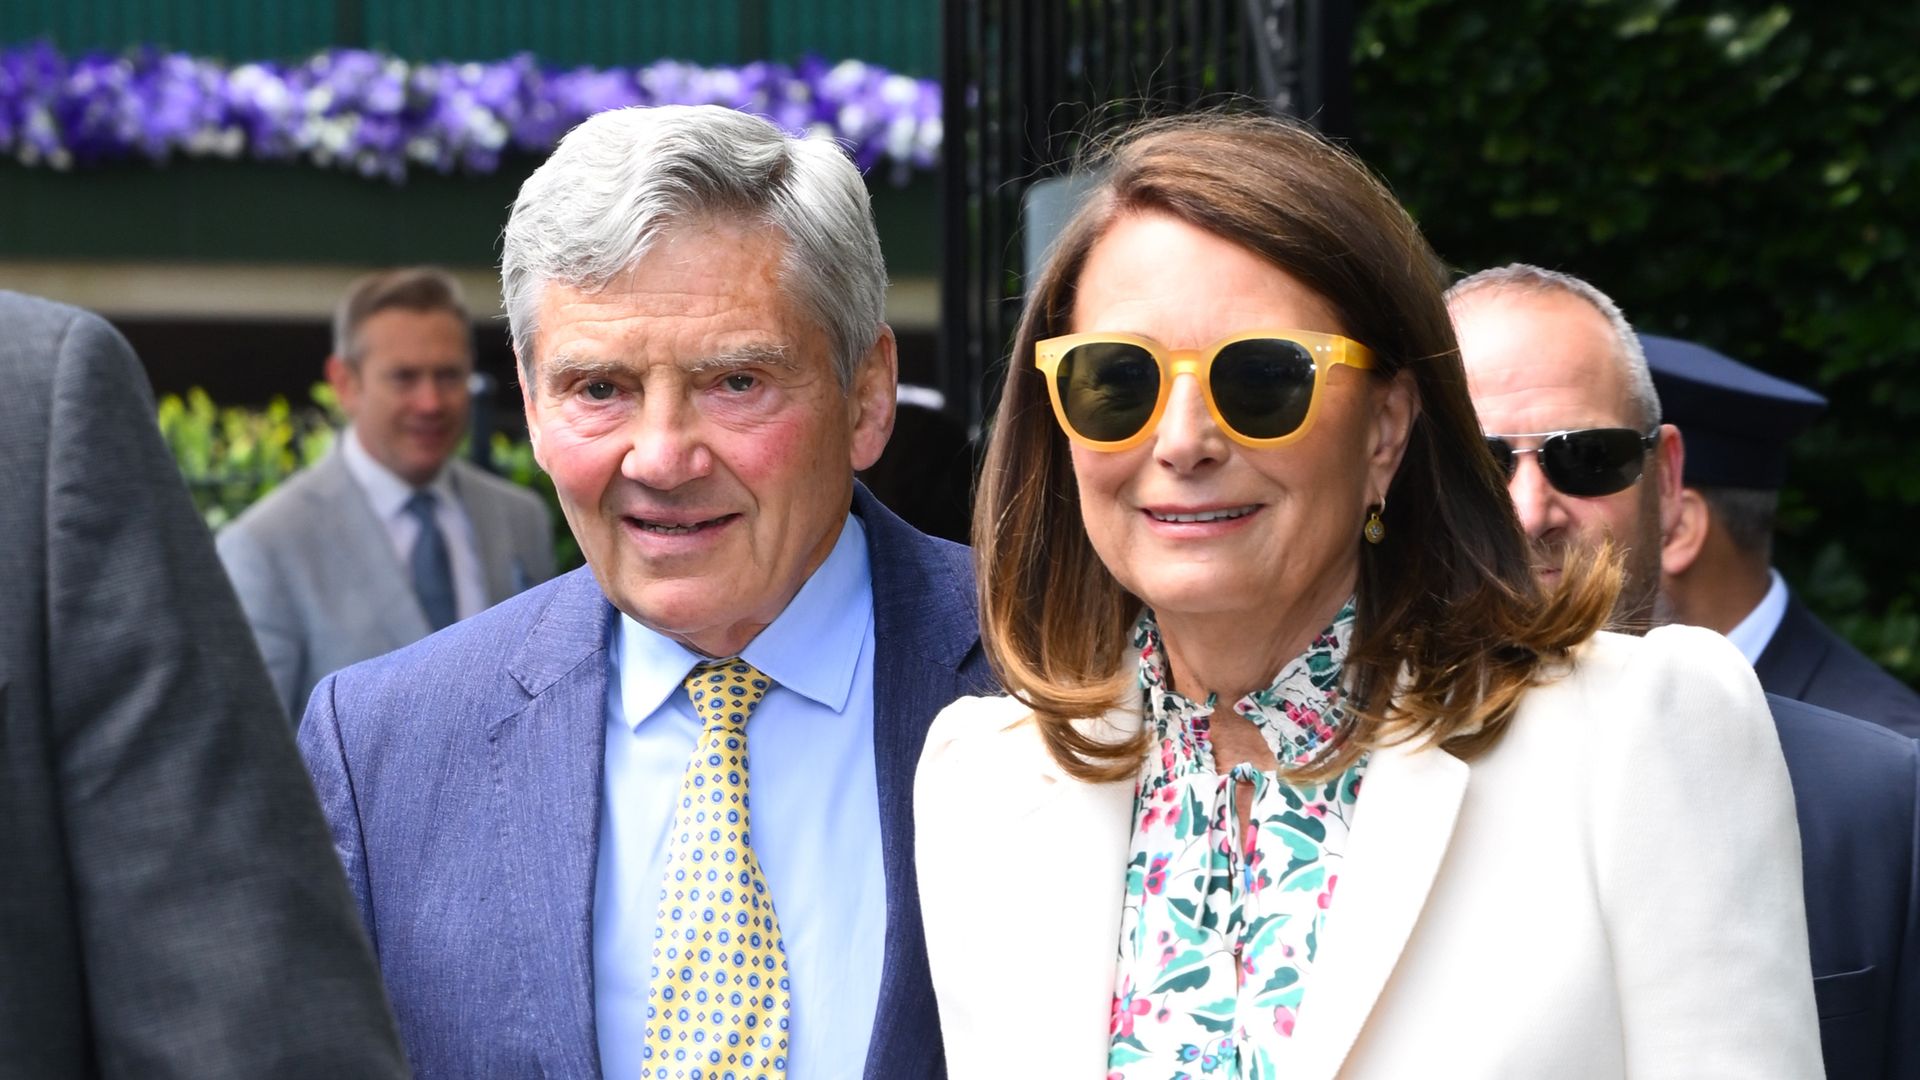 Michael Middleton and Carole Middleton attends day four of the Wimbledon Tennis Championships at the All England Lawn Tennis and Croquet Club